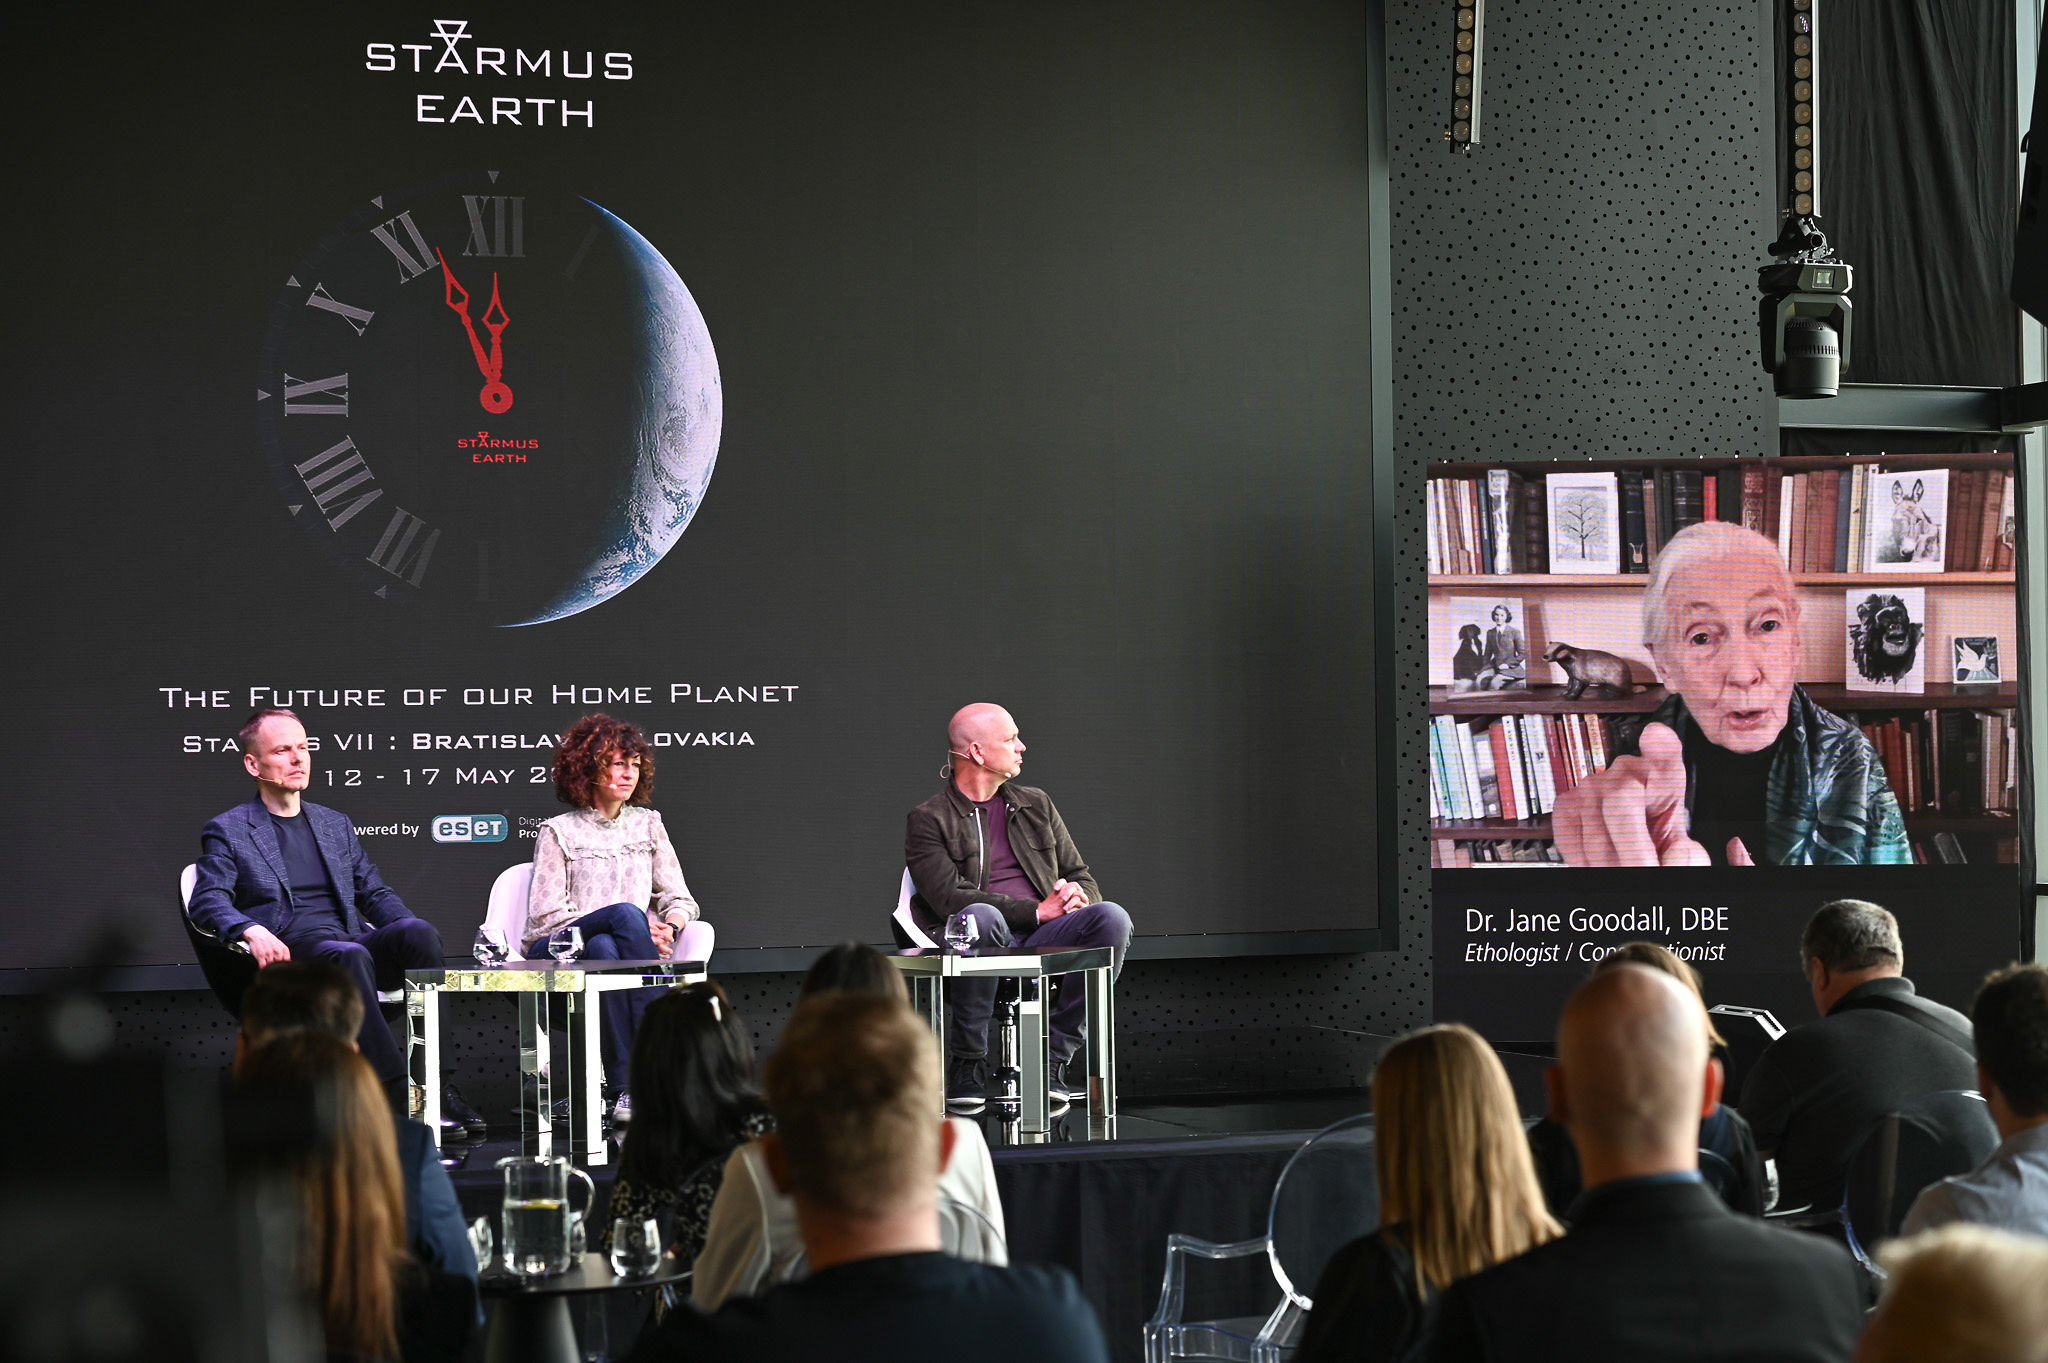 “Starmus Earth: the future of our home planet” launched in Bratislava